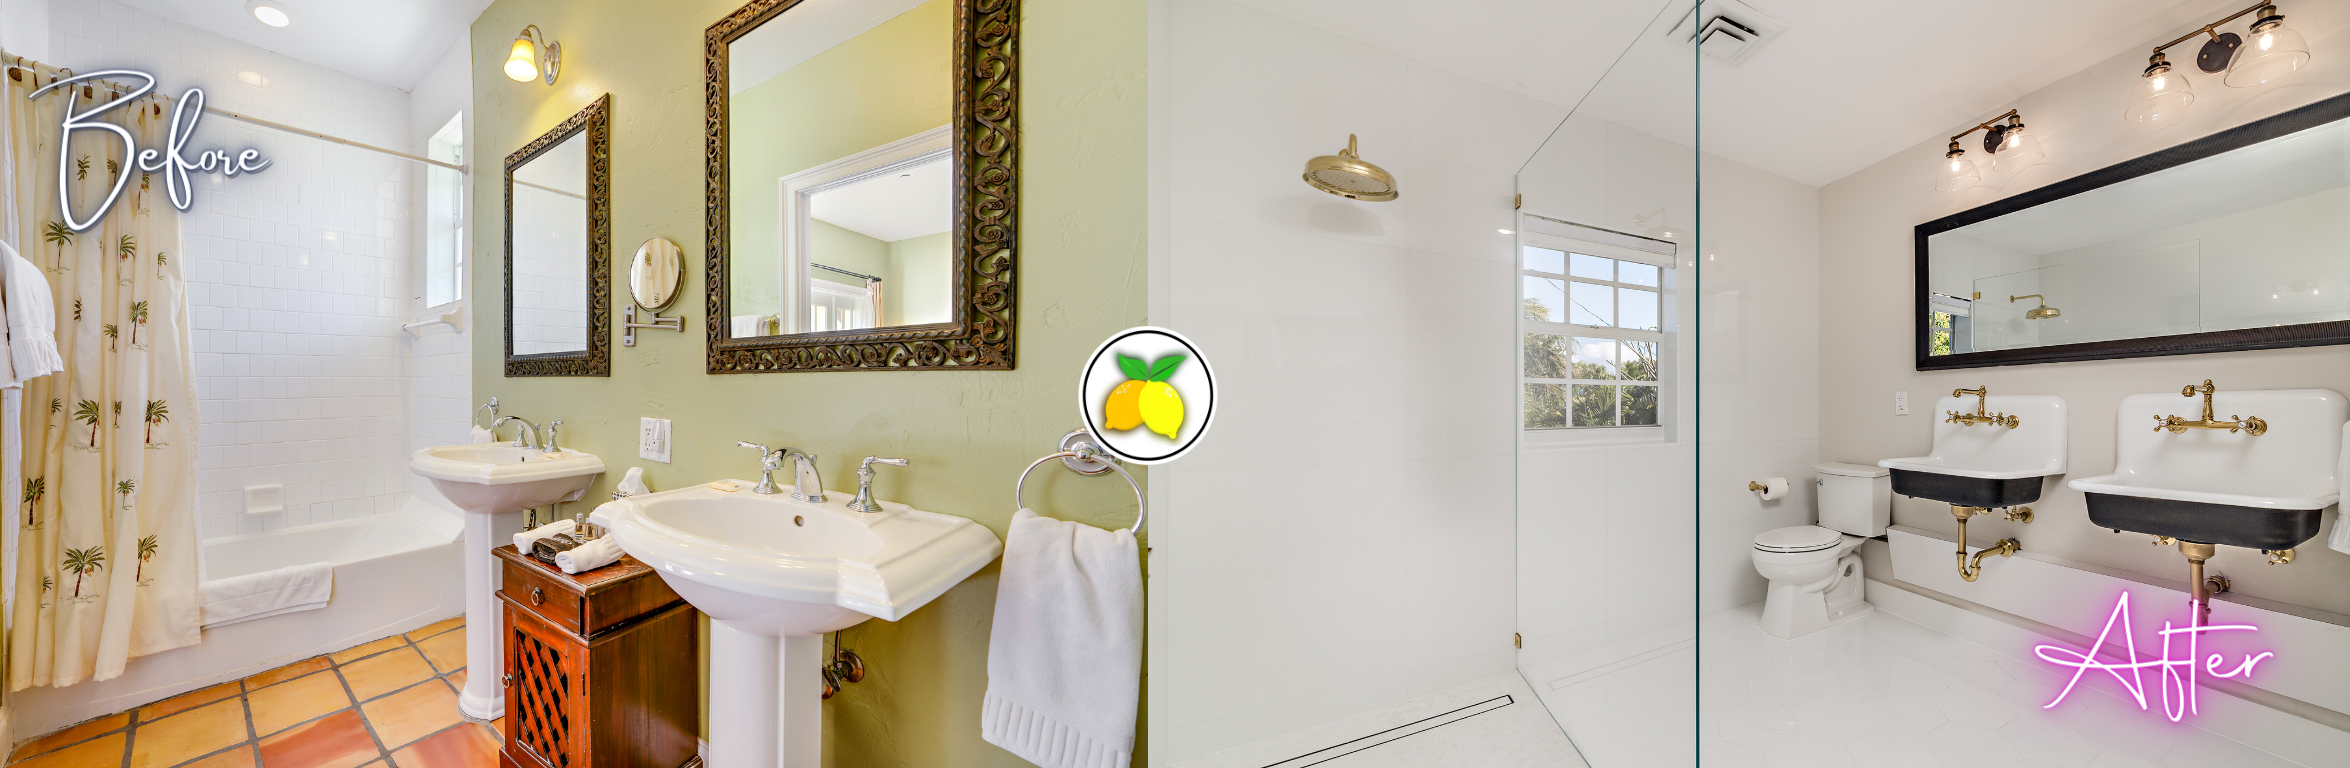 Before and after bathroom renovation: Grandview Gardens Bed and Breakfast